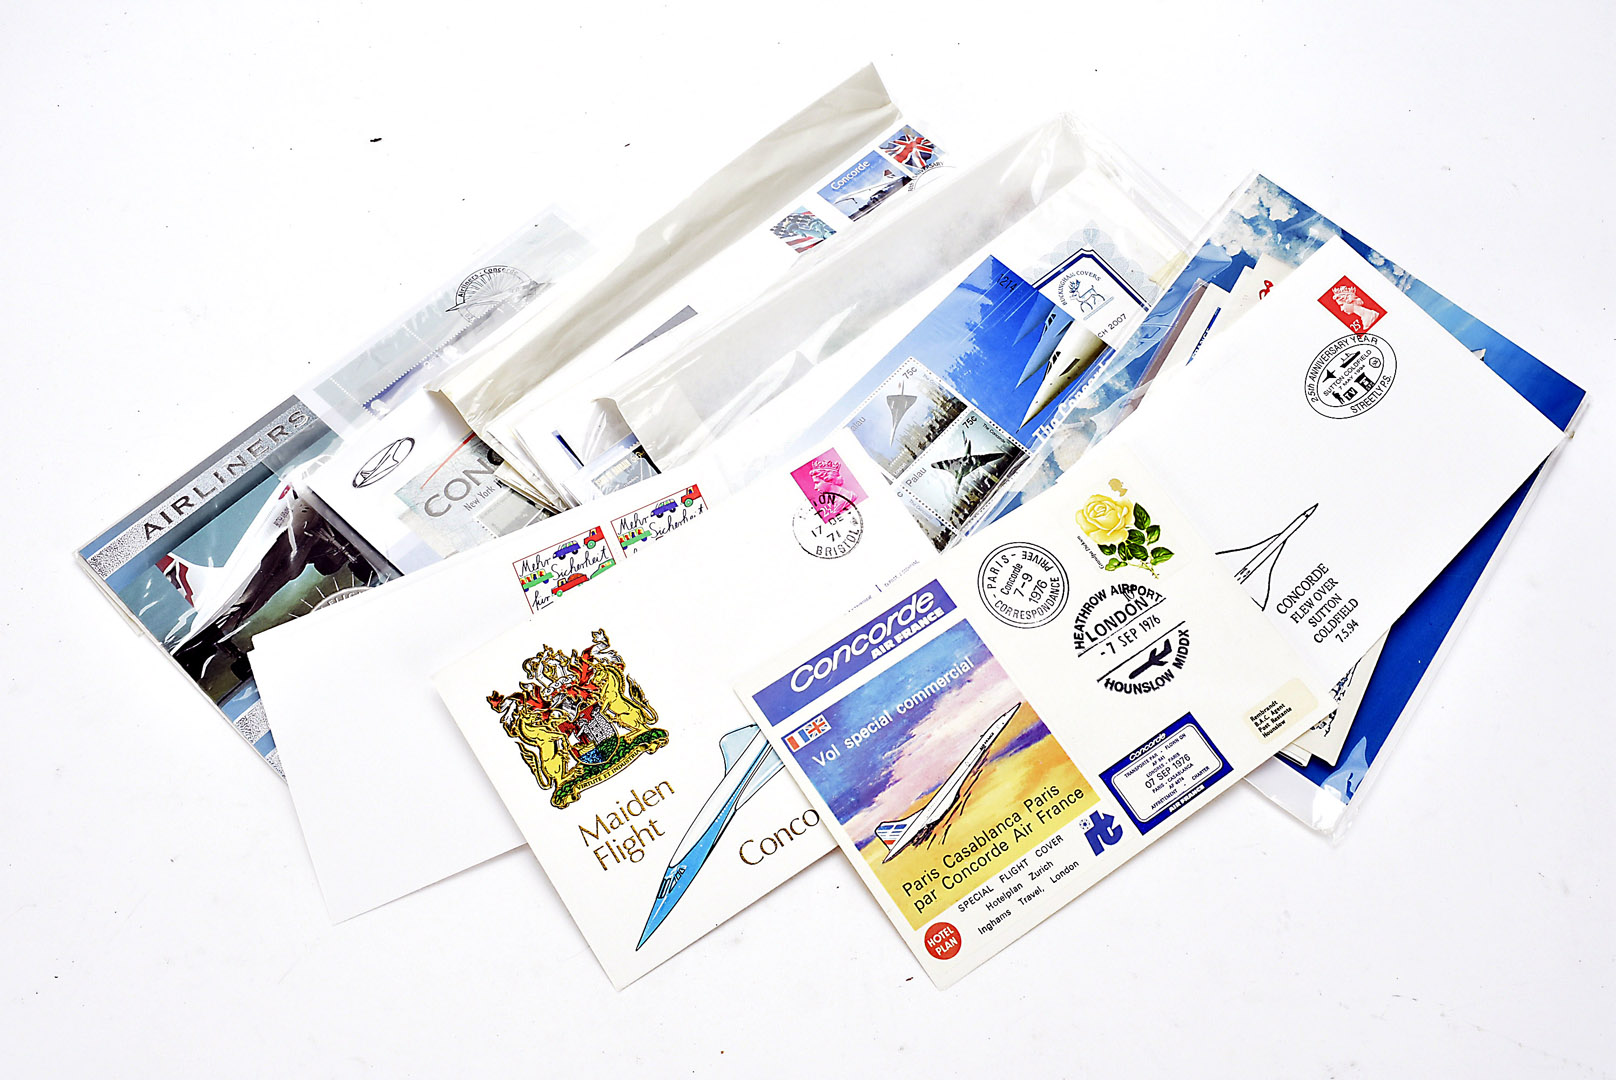 Aviation, Concorde, a selection of approx 20 first day covers and sheets all relating to this iconic